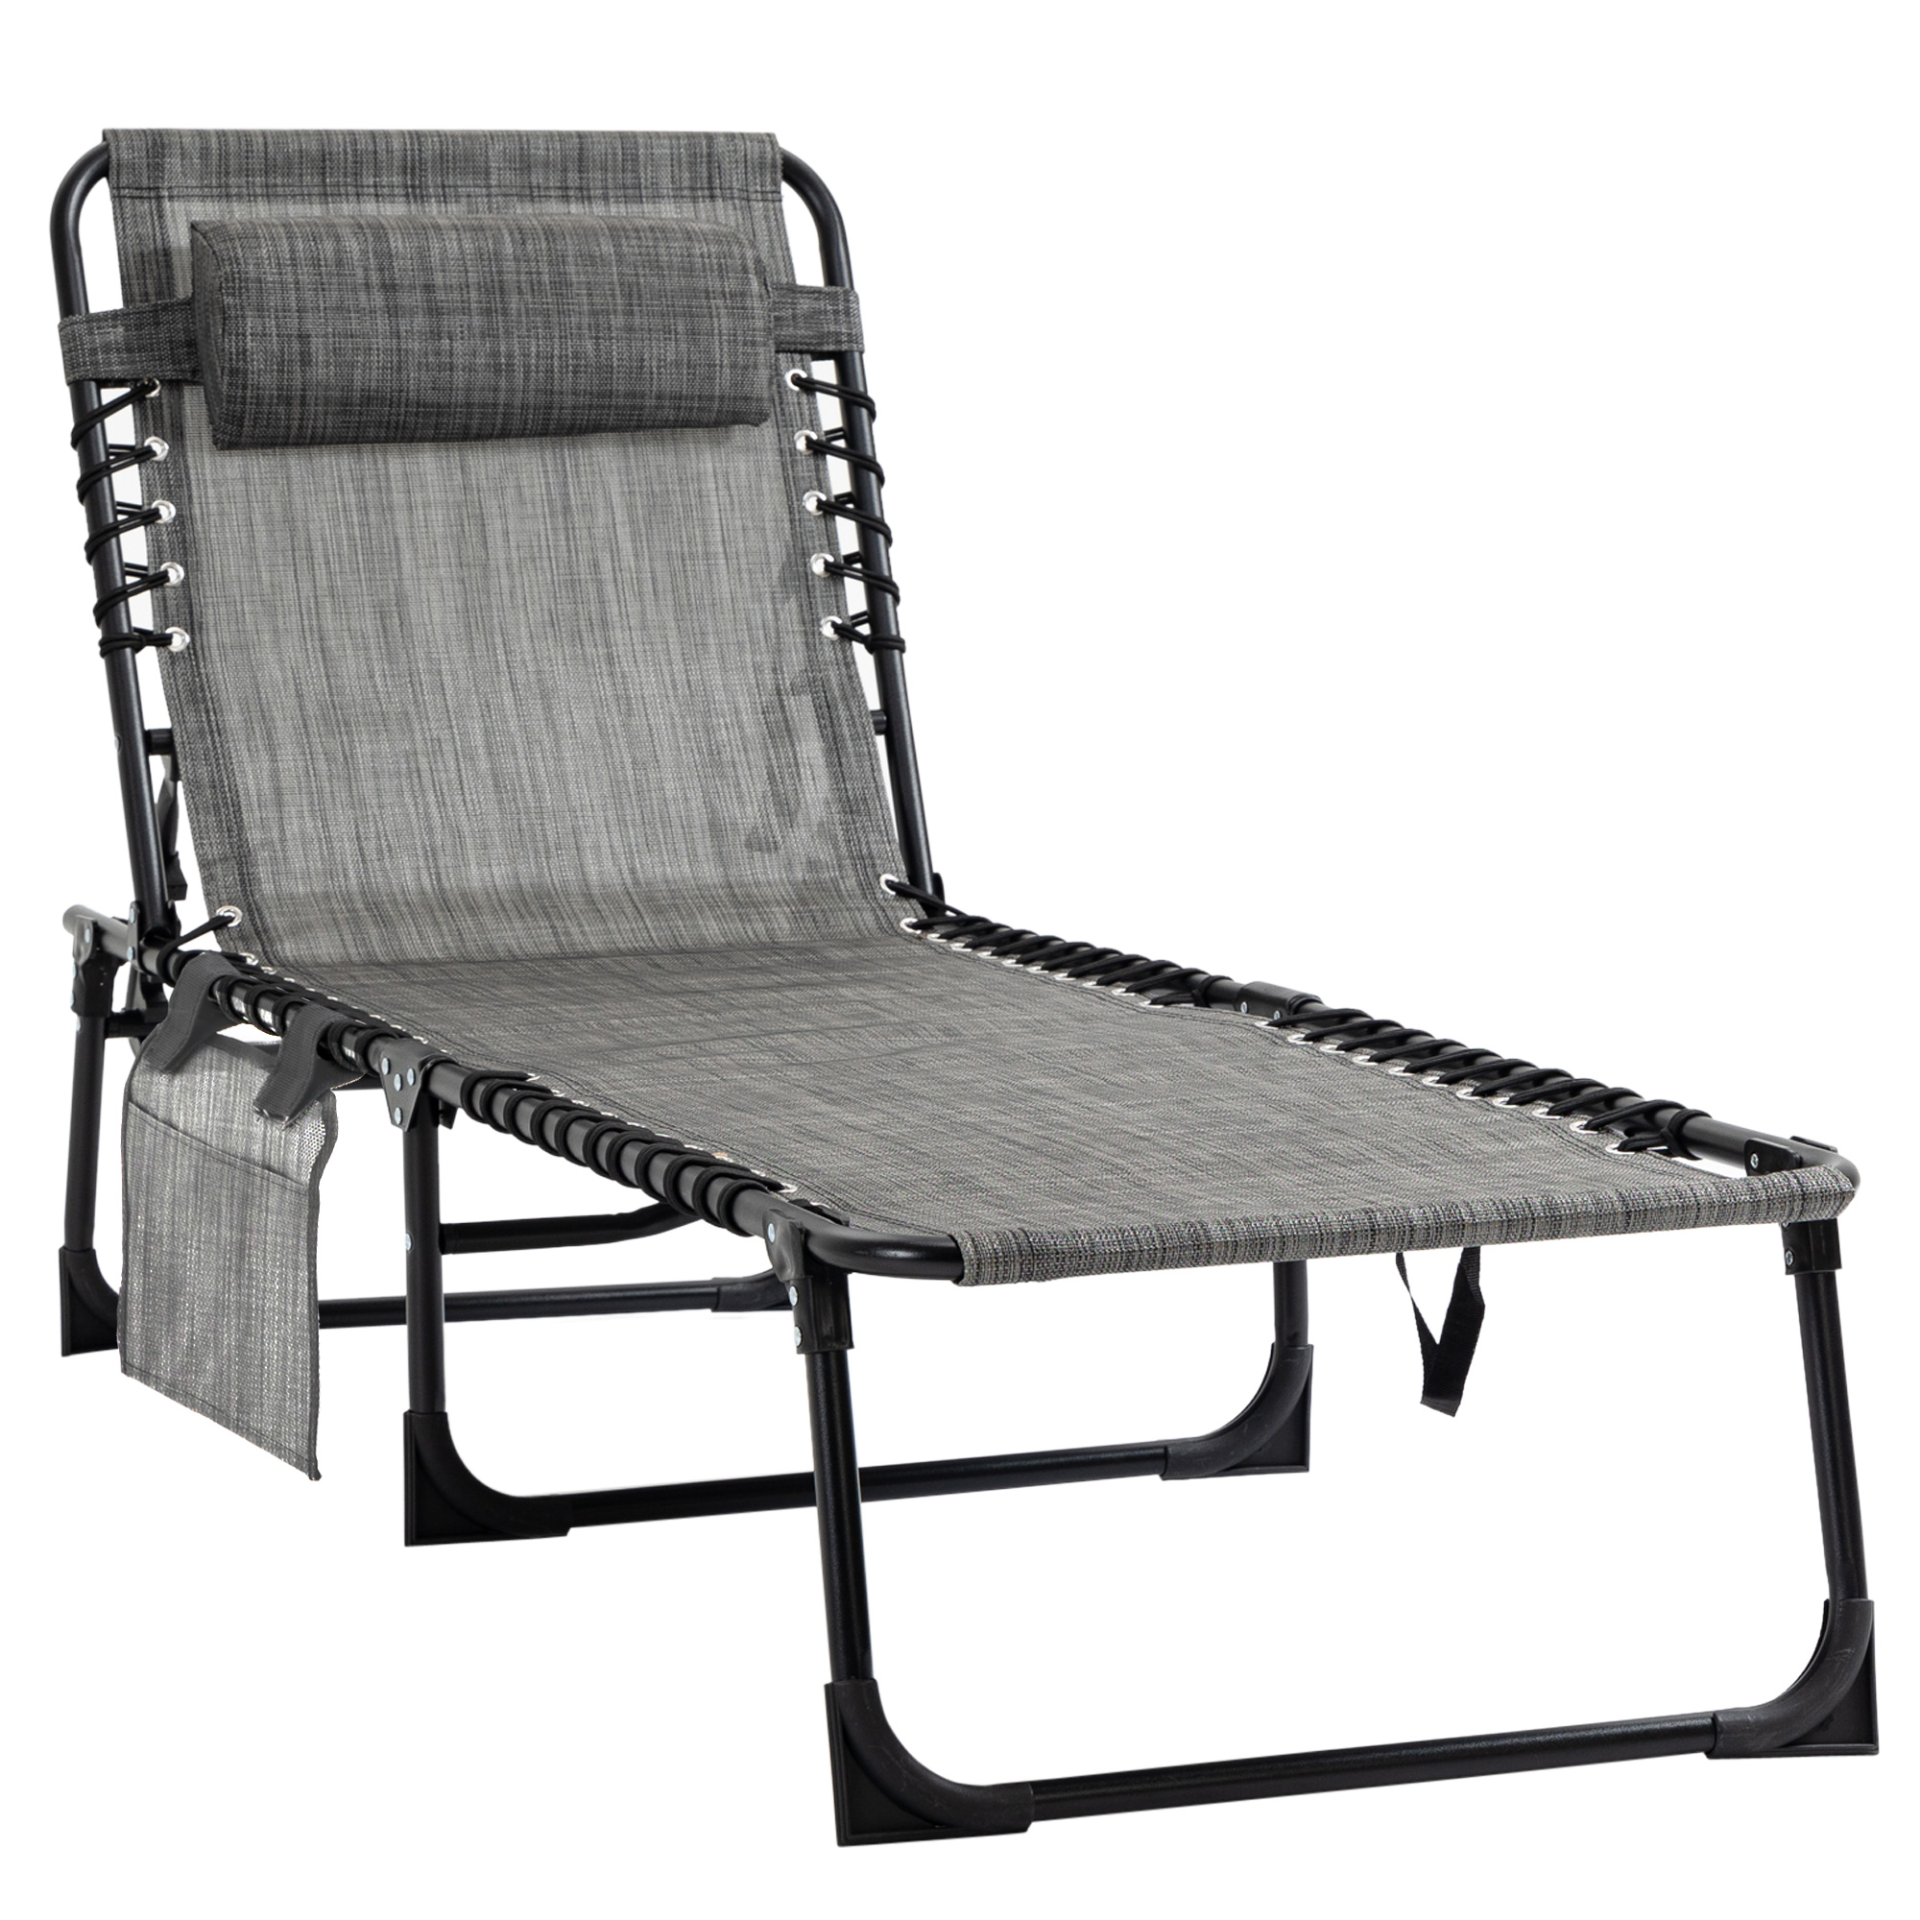 Outsunny Portable Sun Lounger, Folding Camping Bed Cot, Reclining Lounge Chair - Mixed Grey Camping Chair Cosy Camping Co. Mixed-grey  